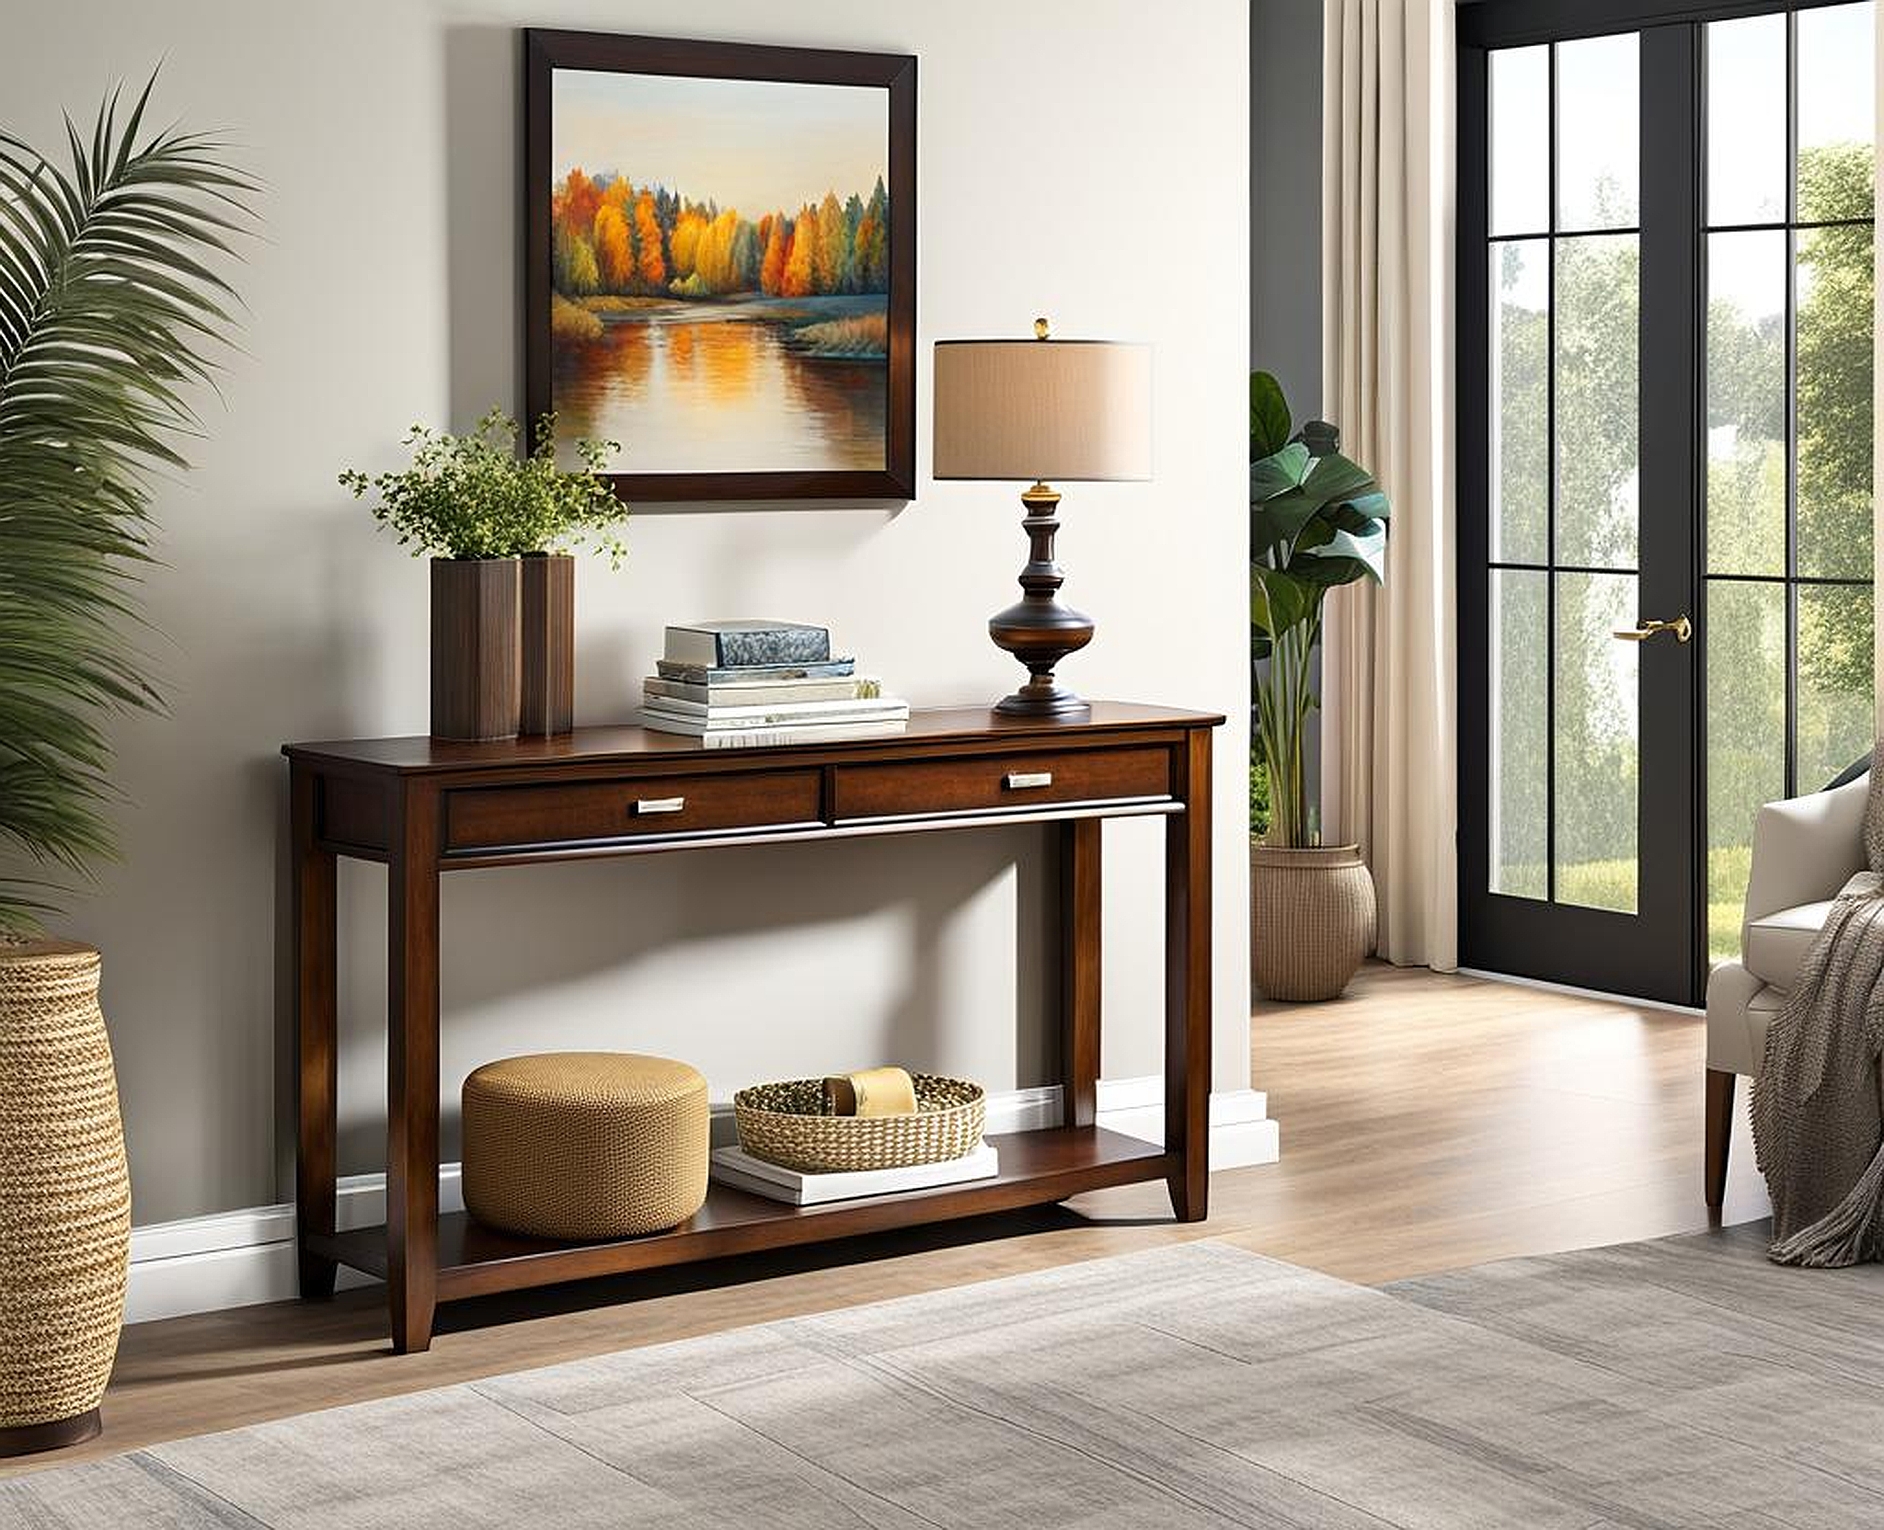 Console Table with Storage Ottoman for a Practical and Stylish Entryway